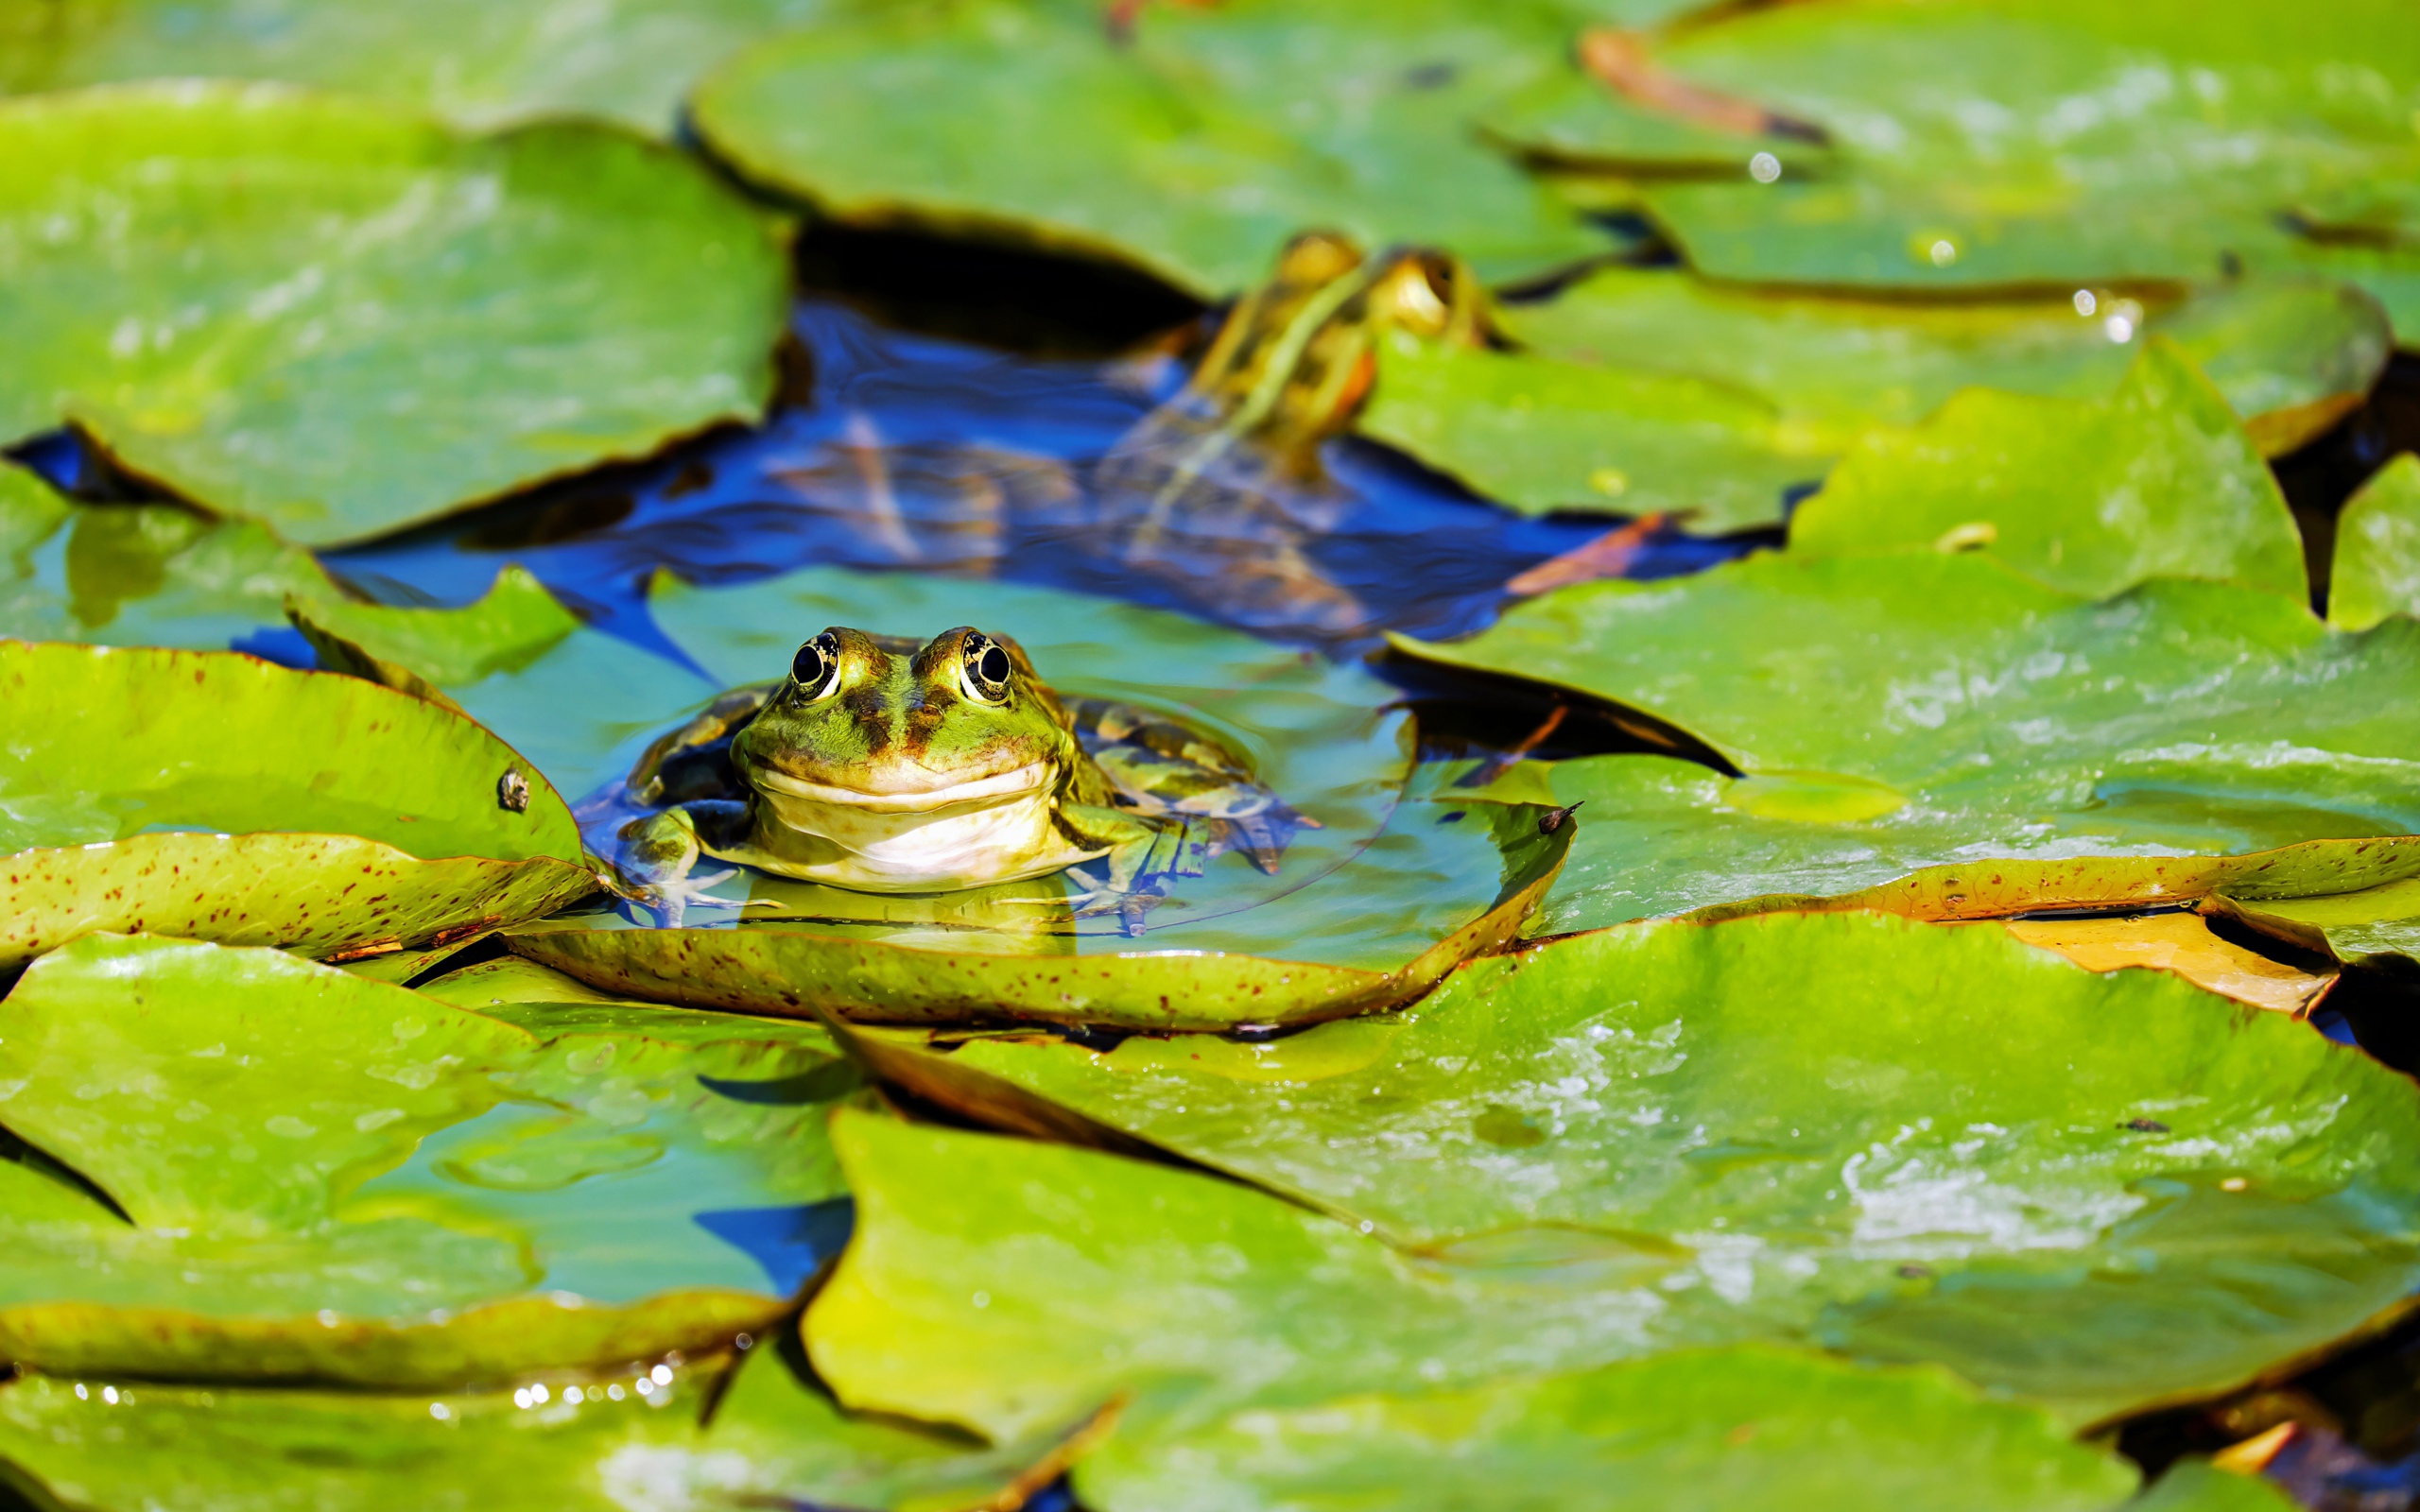 Frog sits on green leaves in water